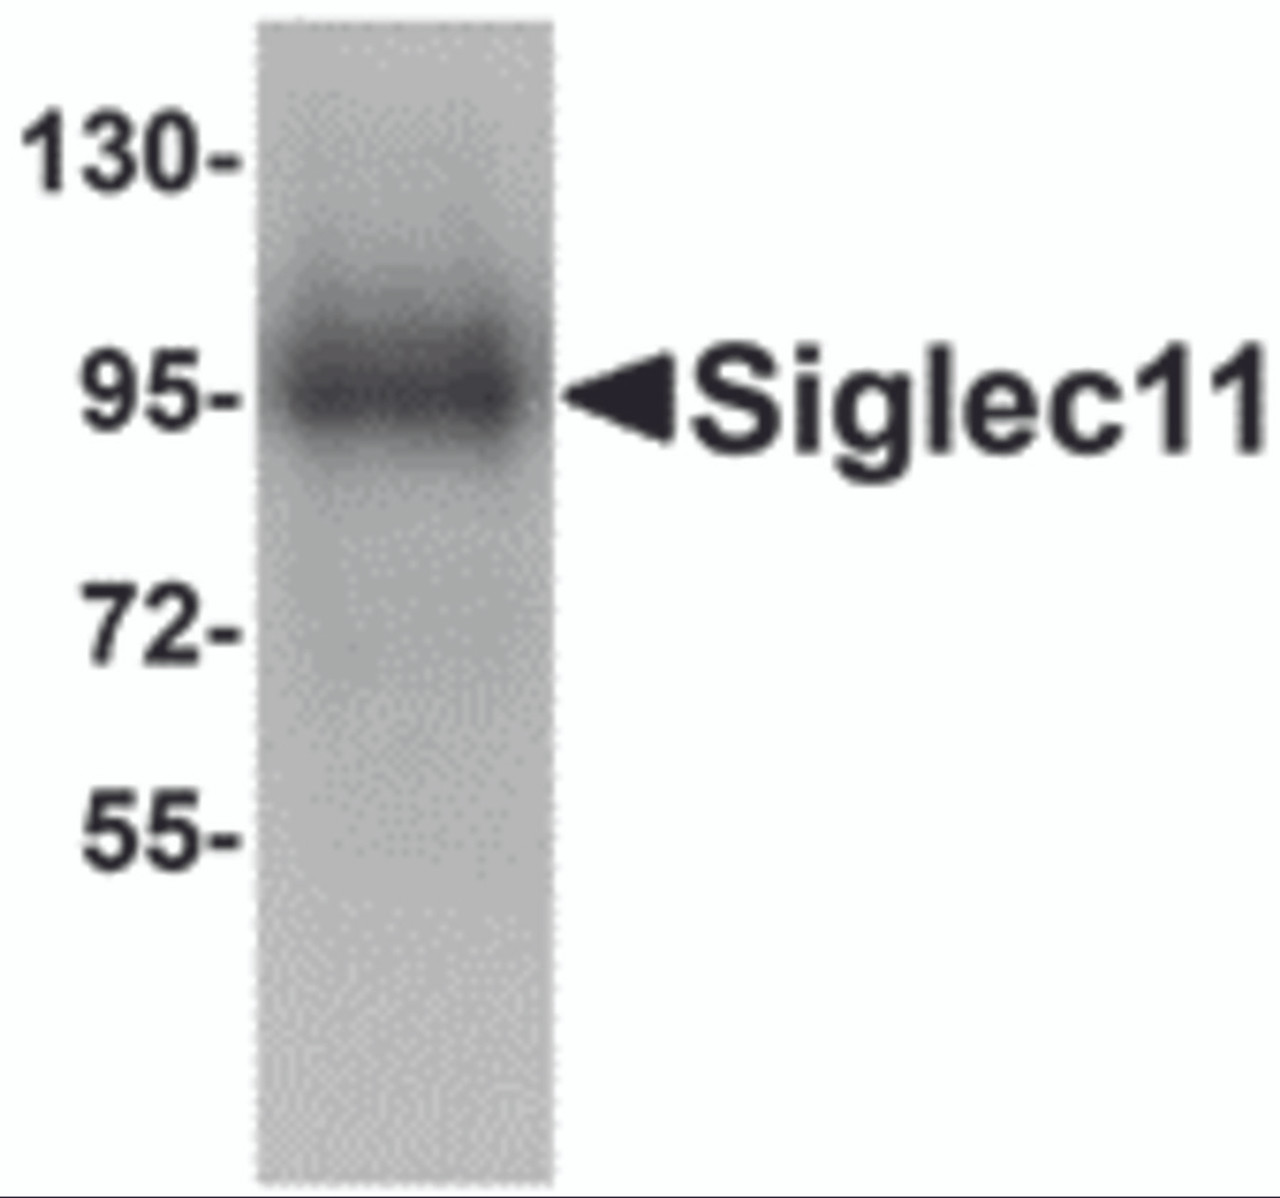 Western blot analysis of Siglec11 in HepG2 cell lysate with Siglec11 antibody at 1 &#956;g/mL.